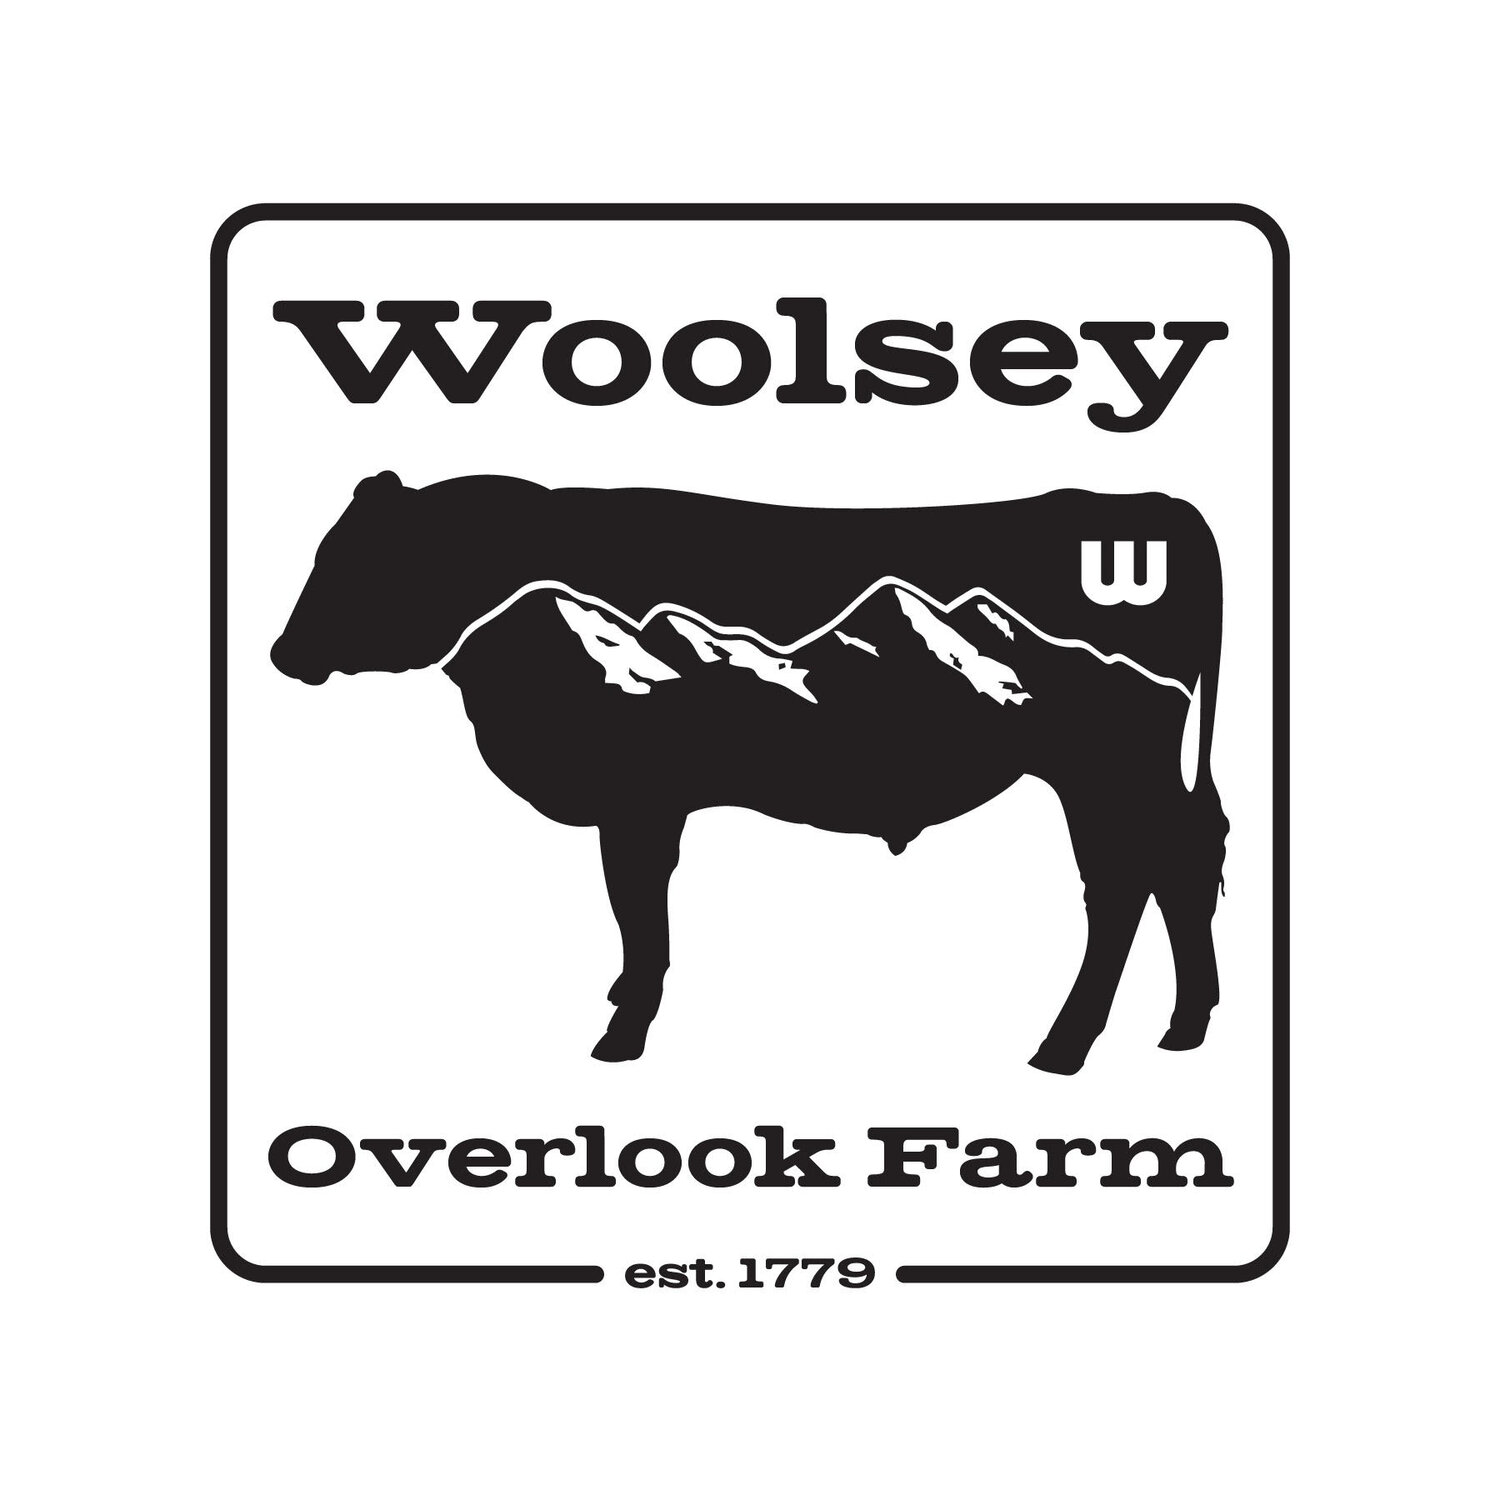 Woolsey Overlook Farm: Since 1779 | All-Natural Beef Producer